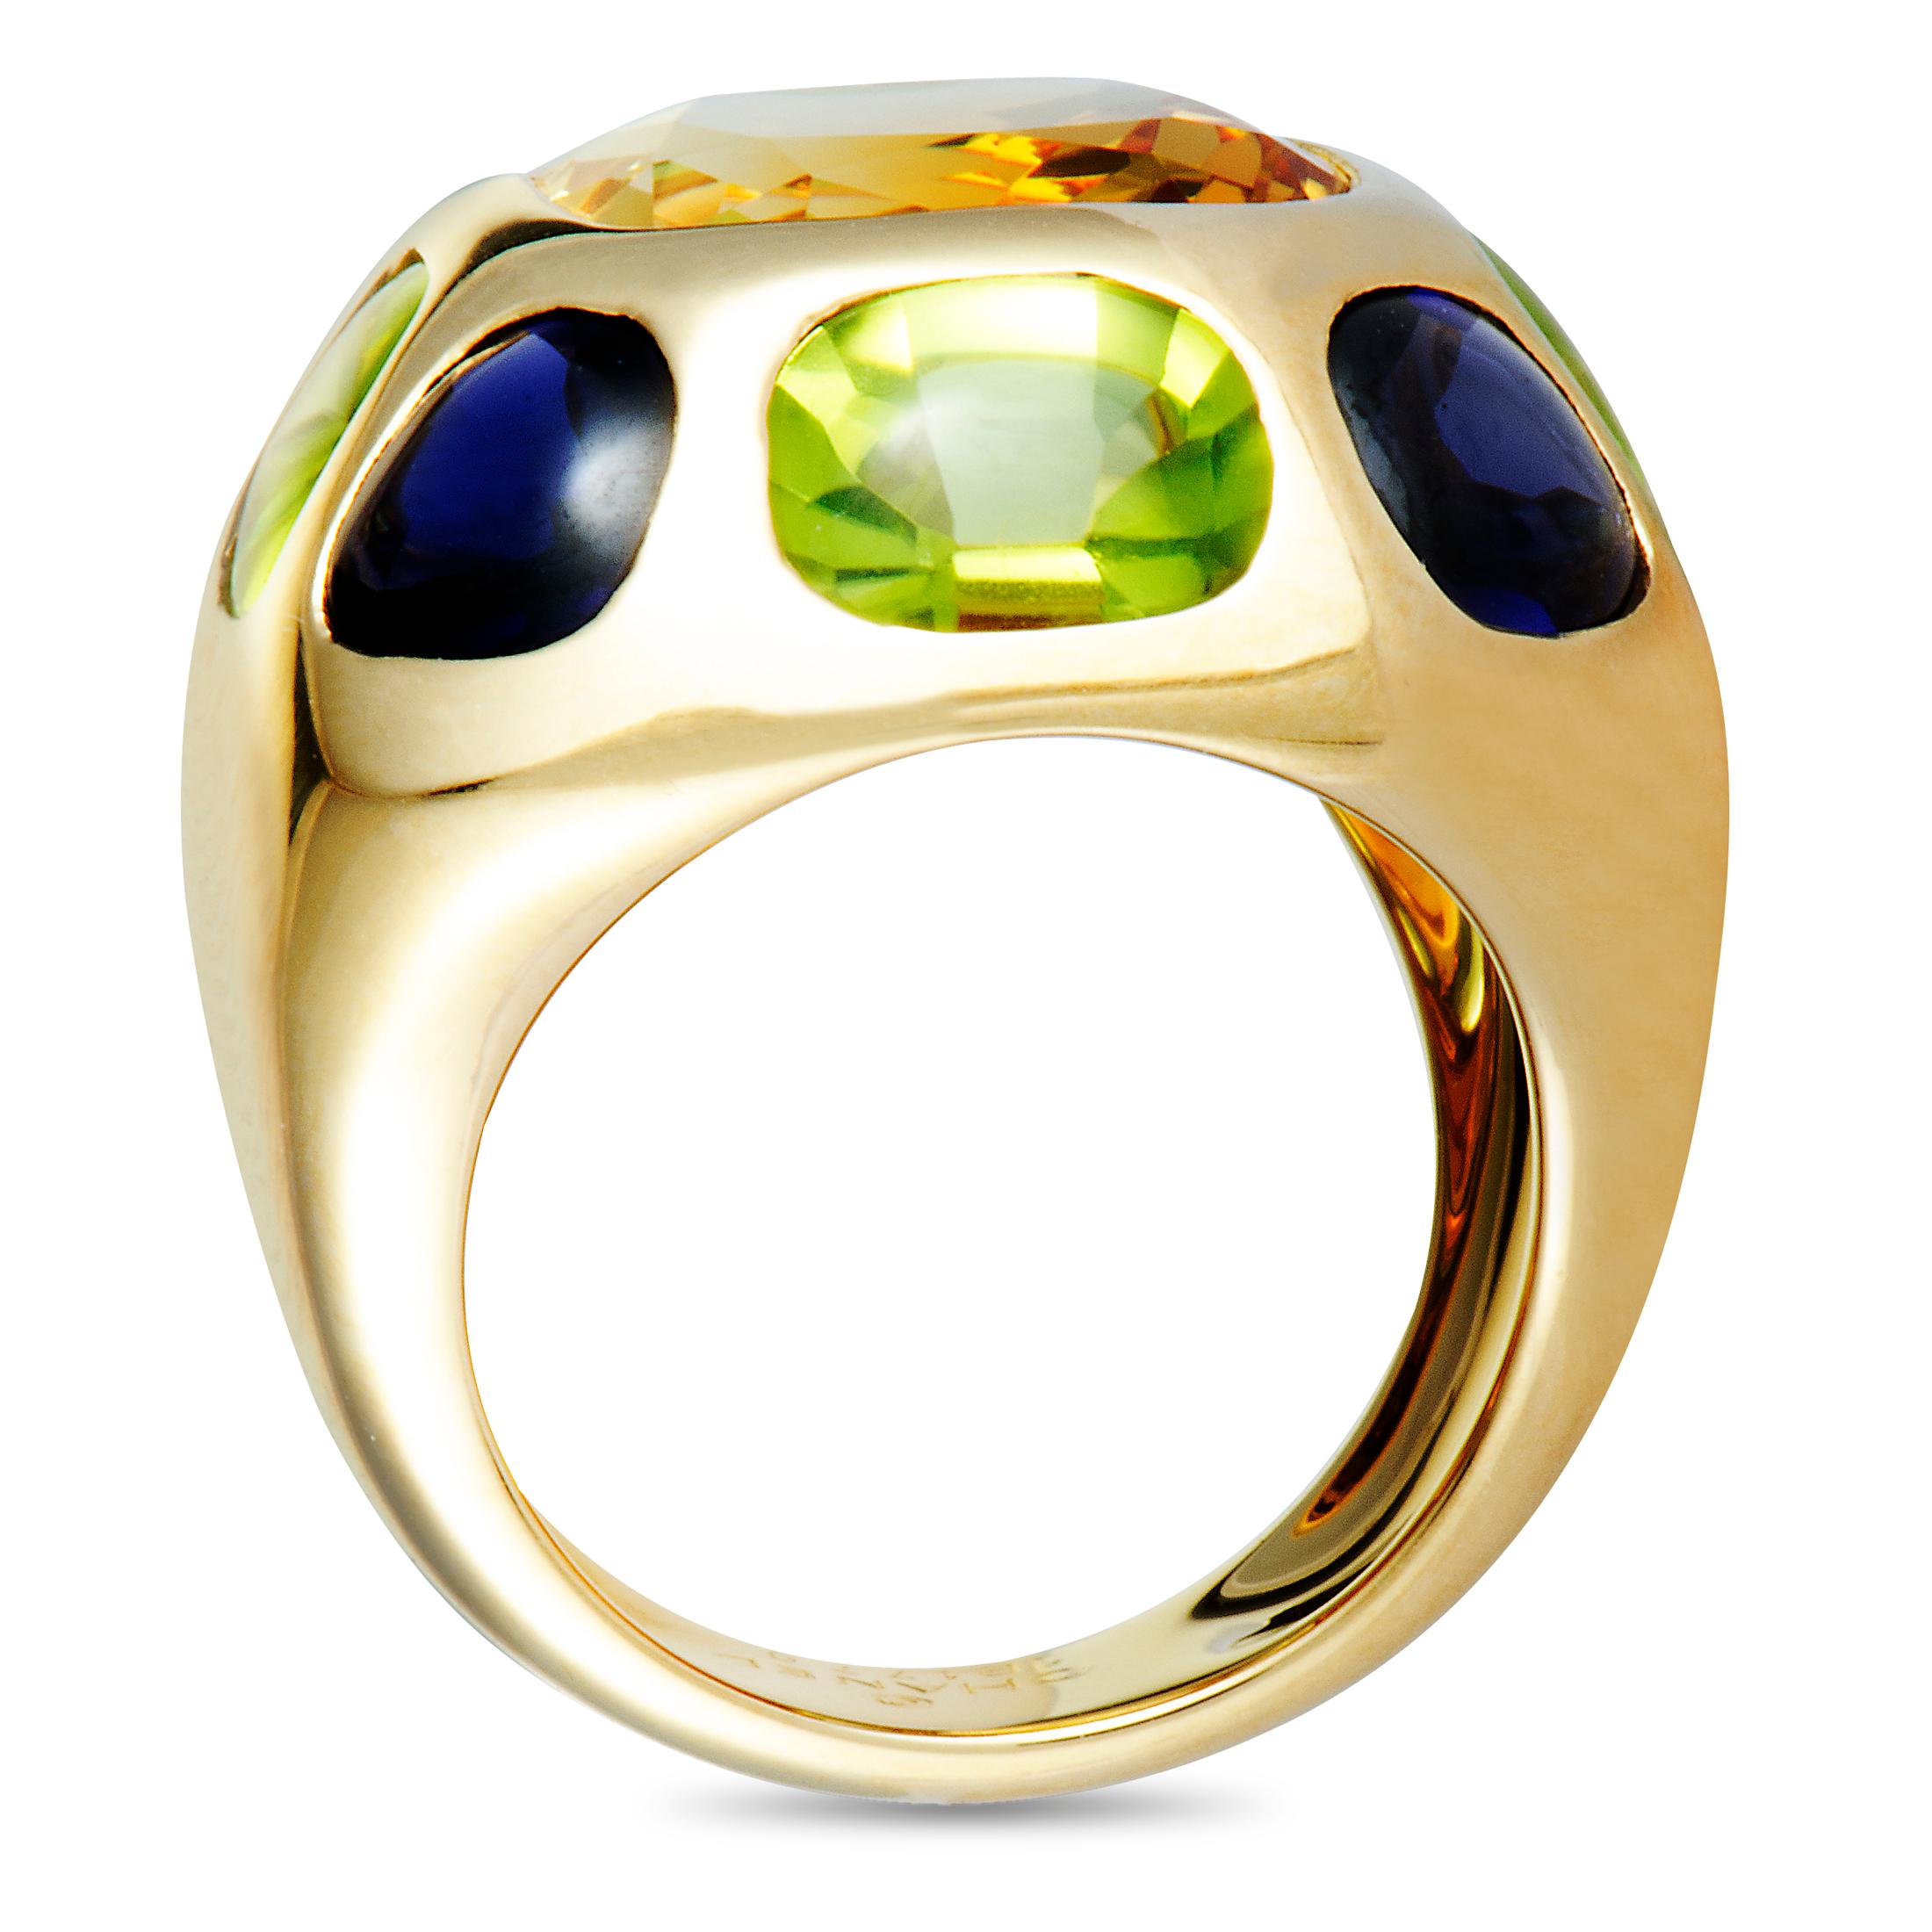 The radiant surface of 18K yellow gold is attractively accentuated by the gorgeous colorful gems in this superb ring presented by Chanel. The ring is embellished with iolite, citrine and peridot stones.
Included Items: Manufacturer's Box
Ring Size: